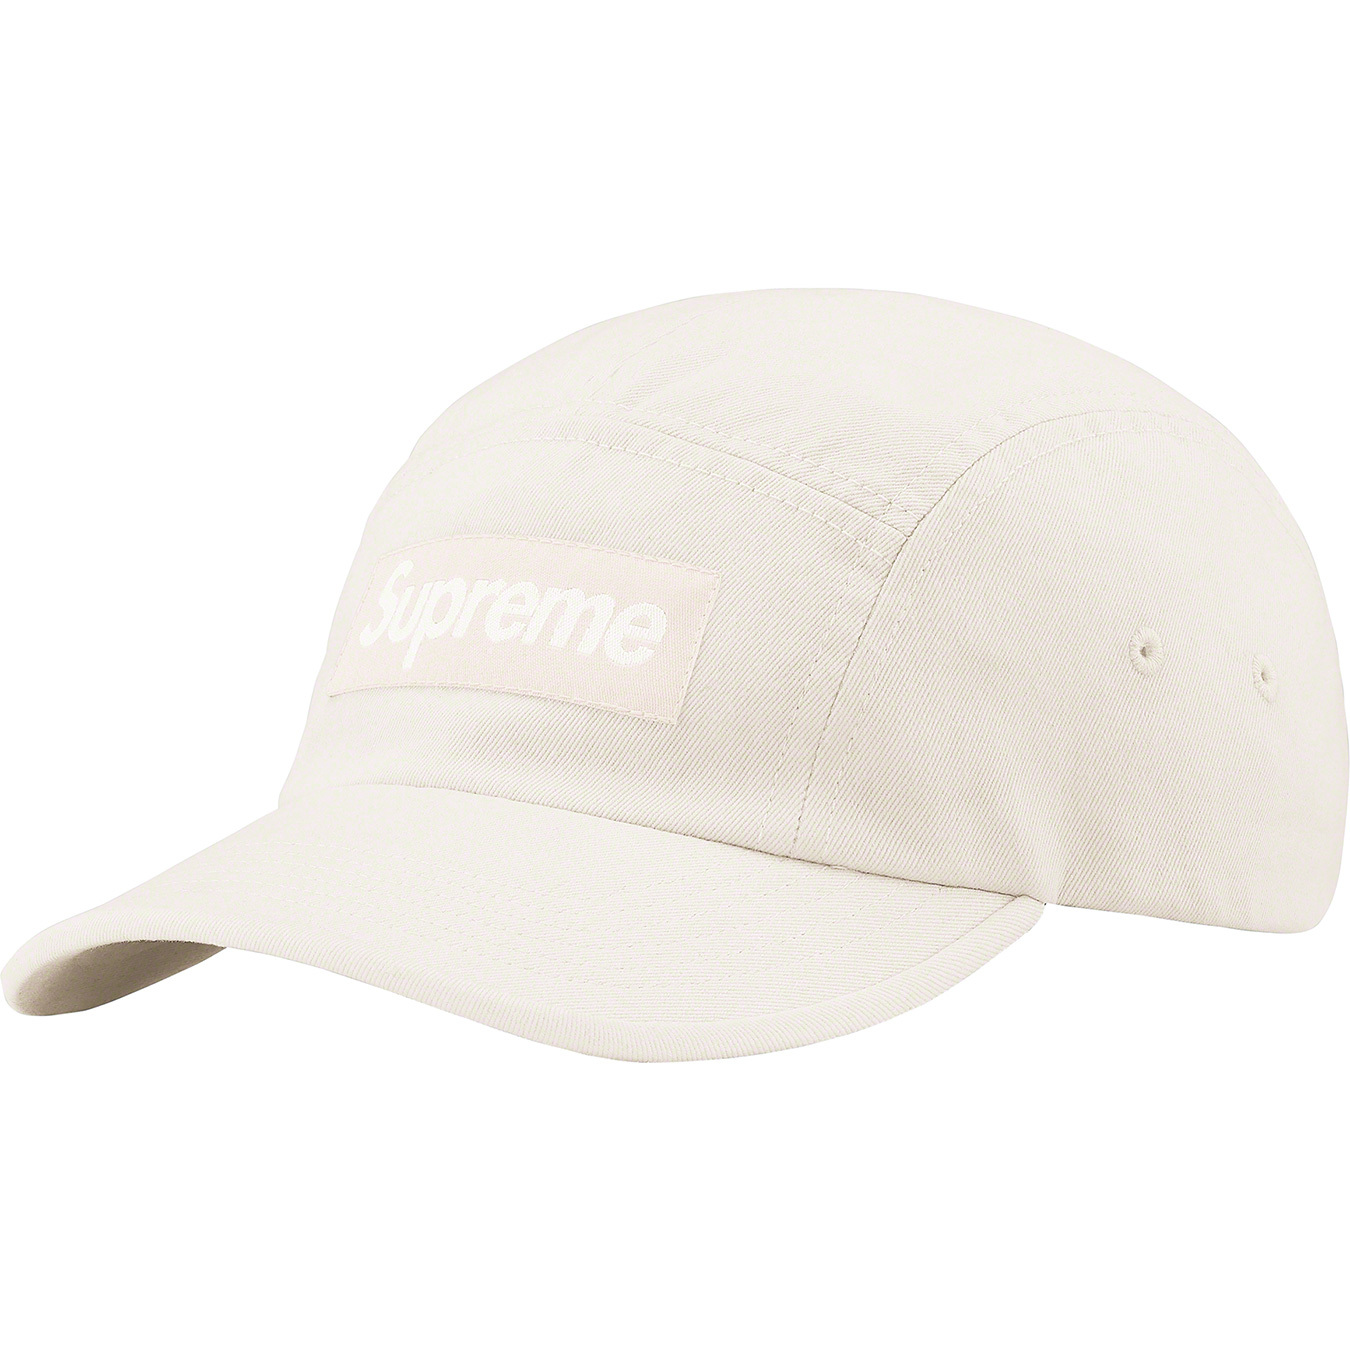 Buy Supreme Washed Chino Twill Camp Cap 'Neon Red' - FW21H90 NEON